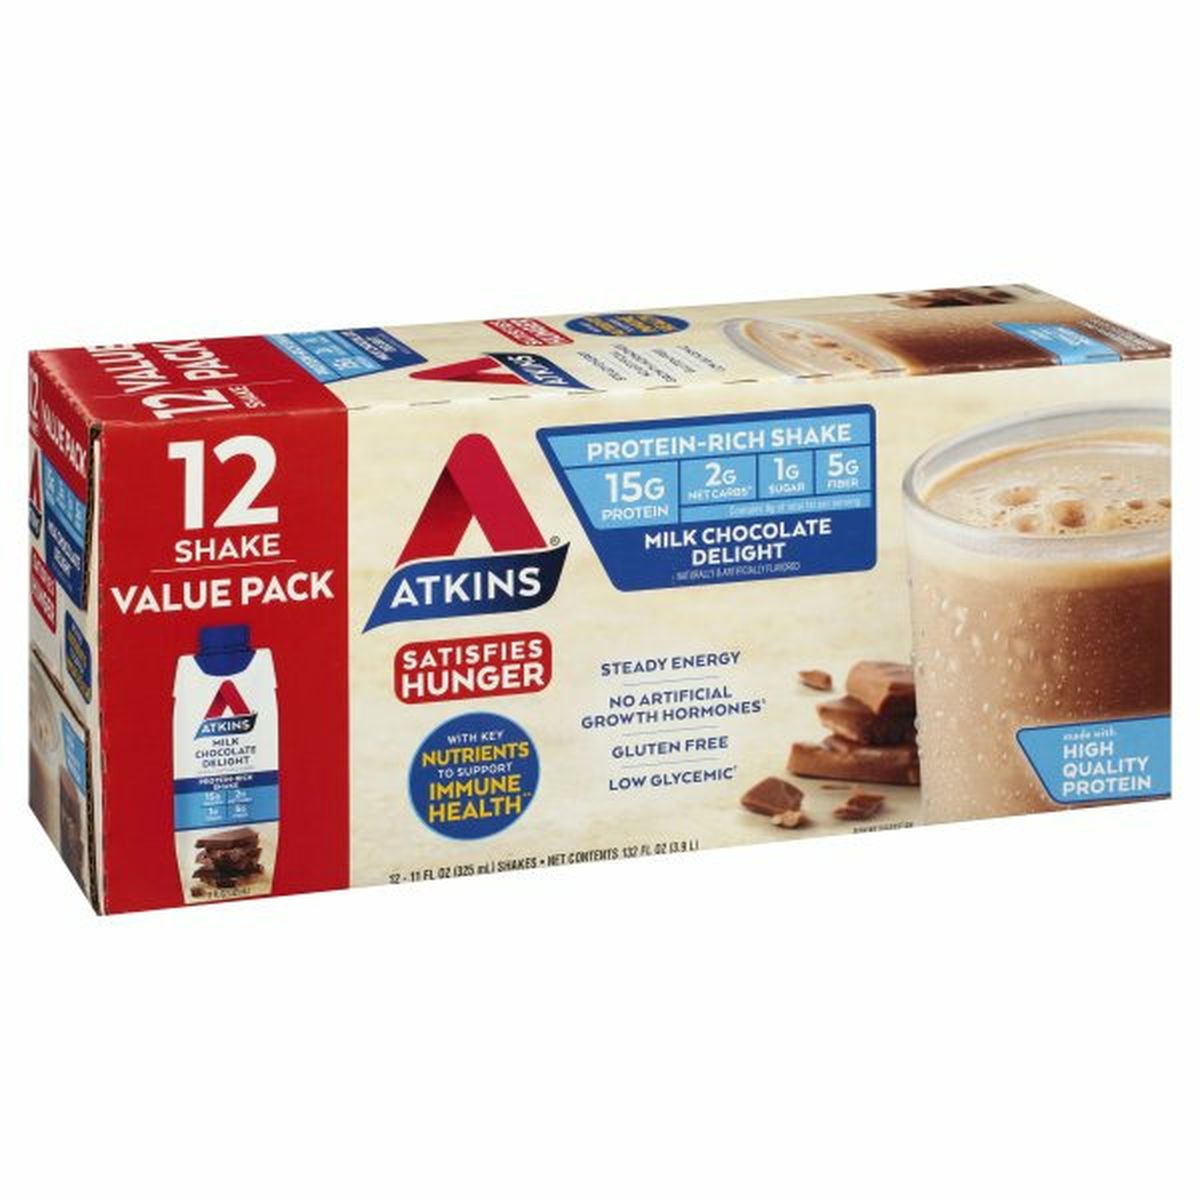 Calories in Atkins Protein-Rich Shake, Milk Chocolate Delight, Value Pack